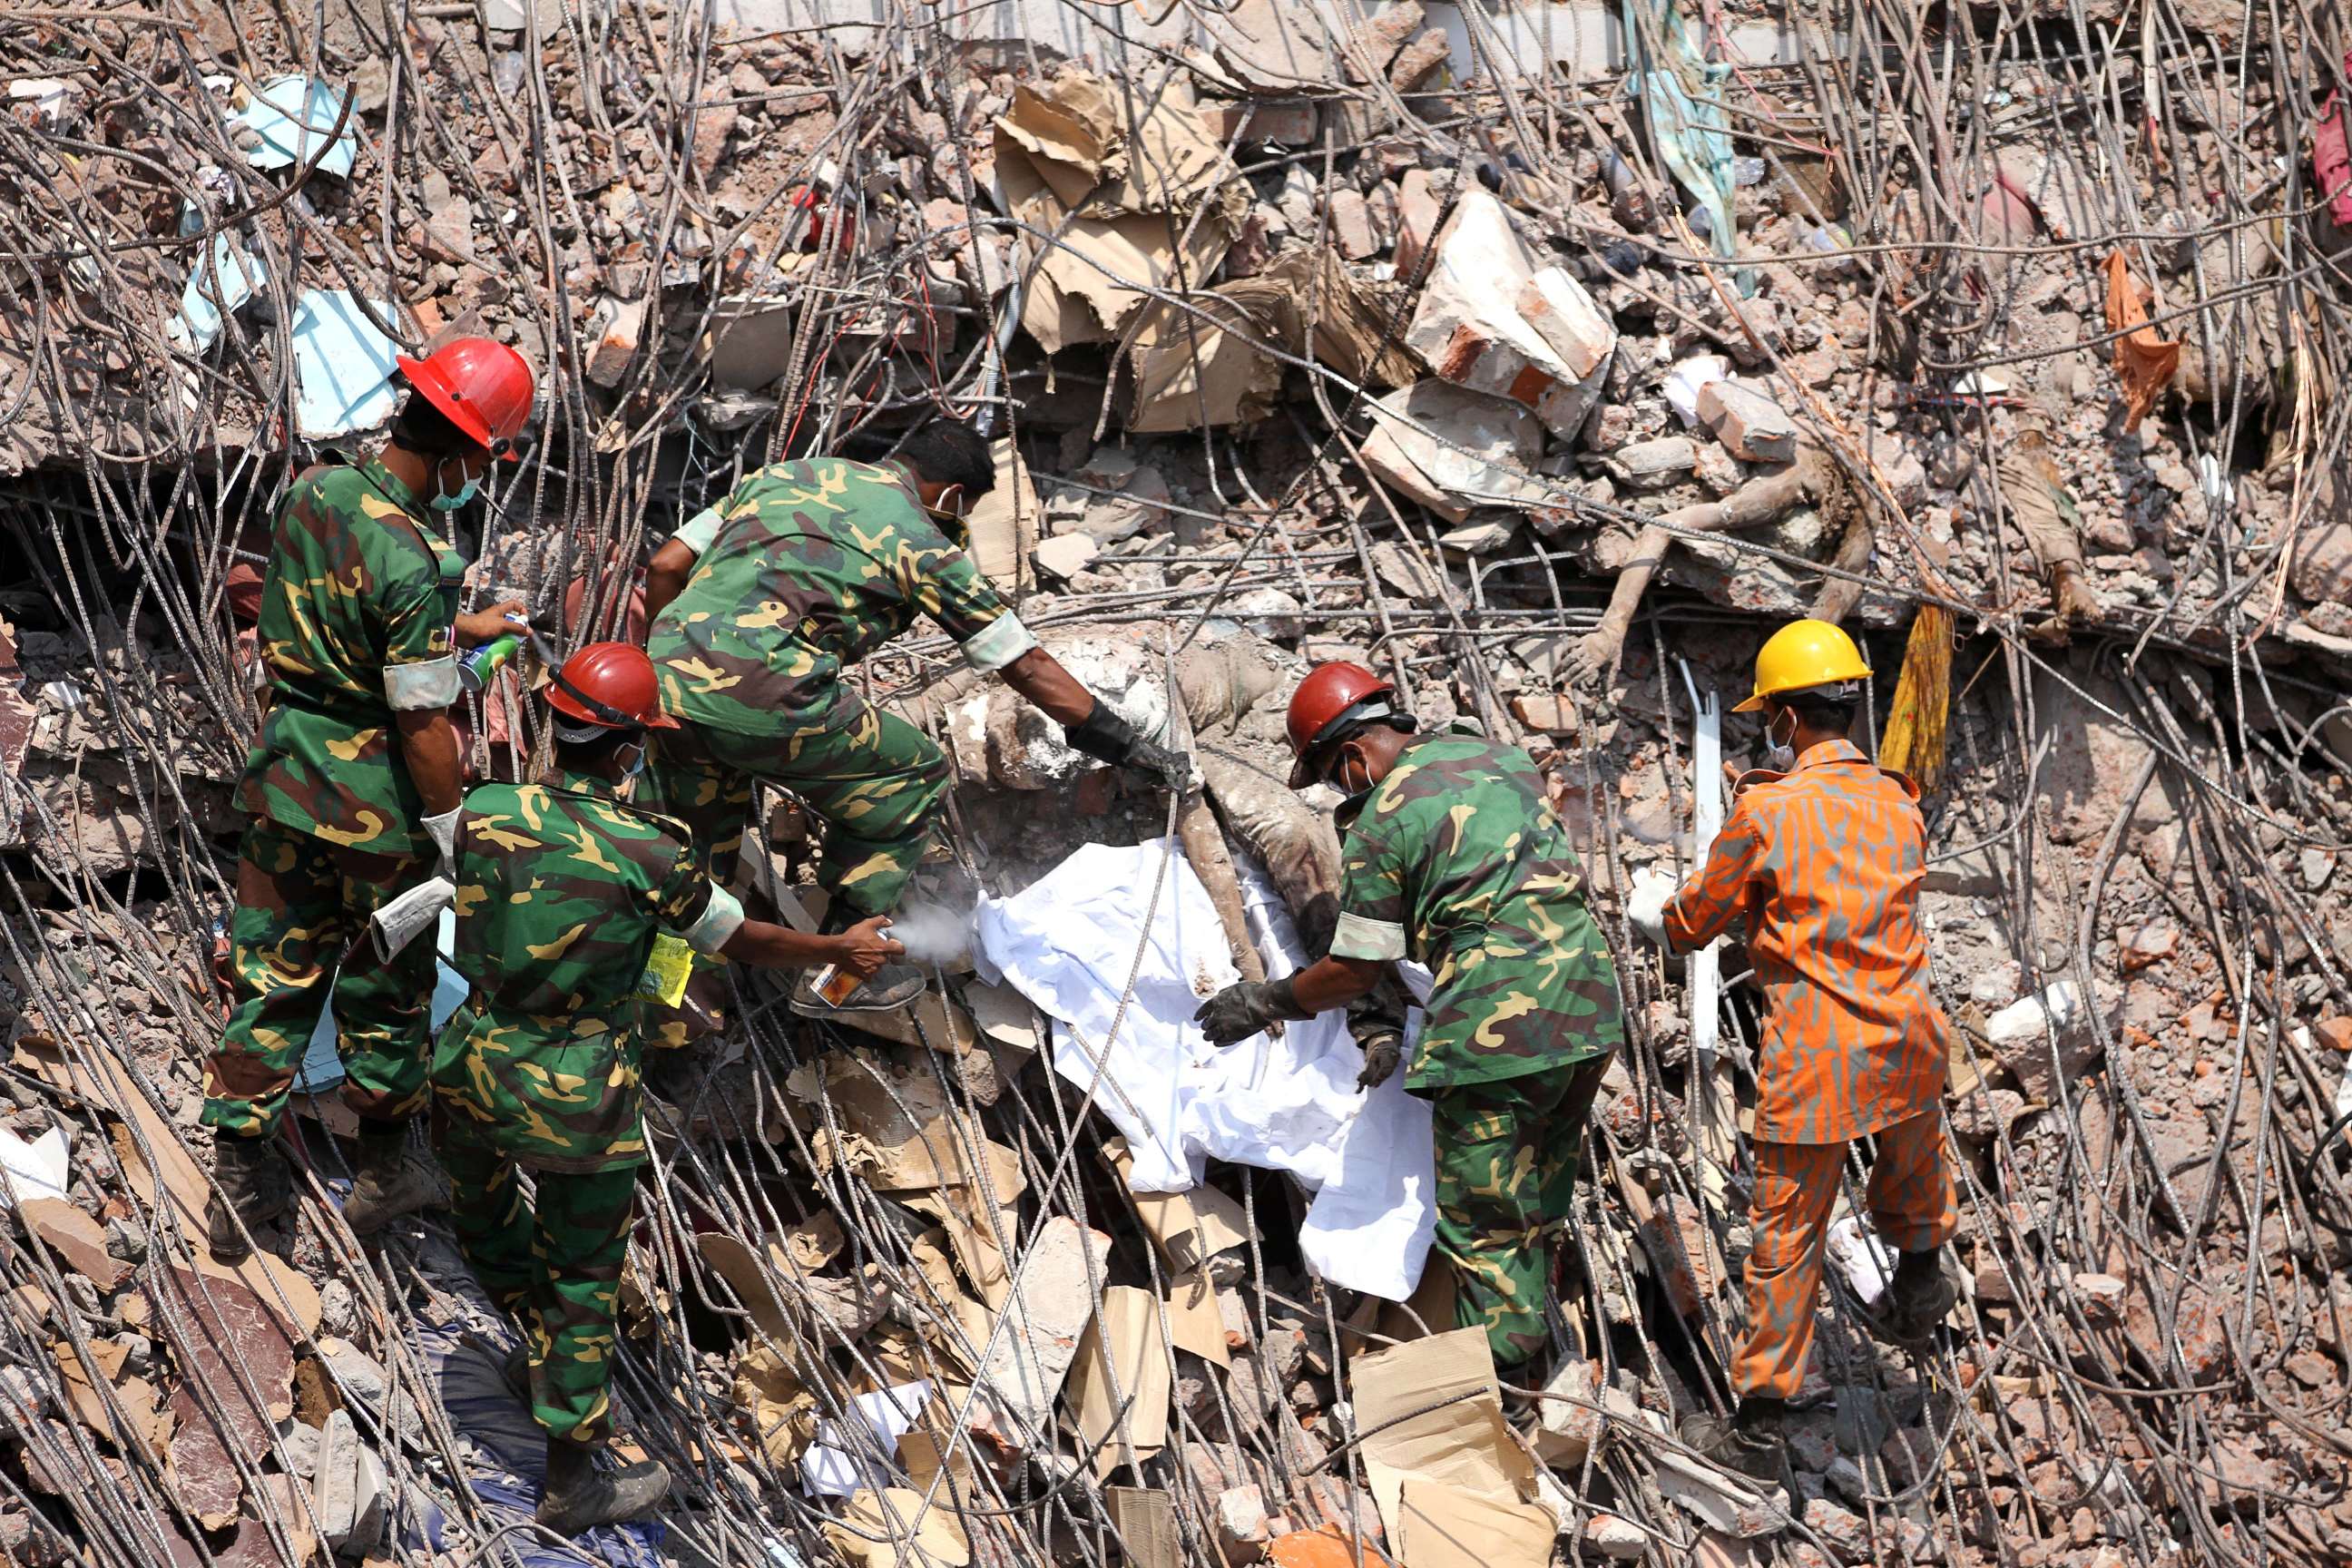 Rescuers work to dislodge decomposed bodies caught in the rubble of the collapsed Rana Plaza factory building near Dhaka, Bangladesh on Saturday. Photo: AP